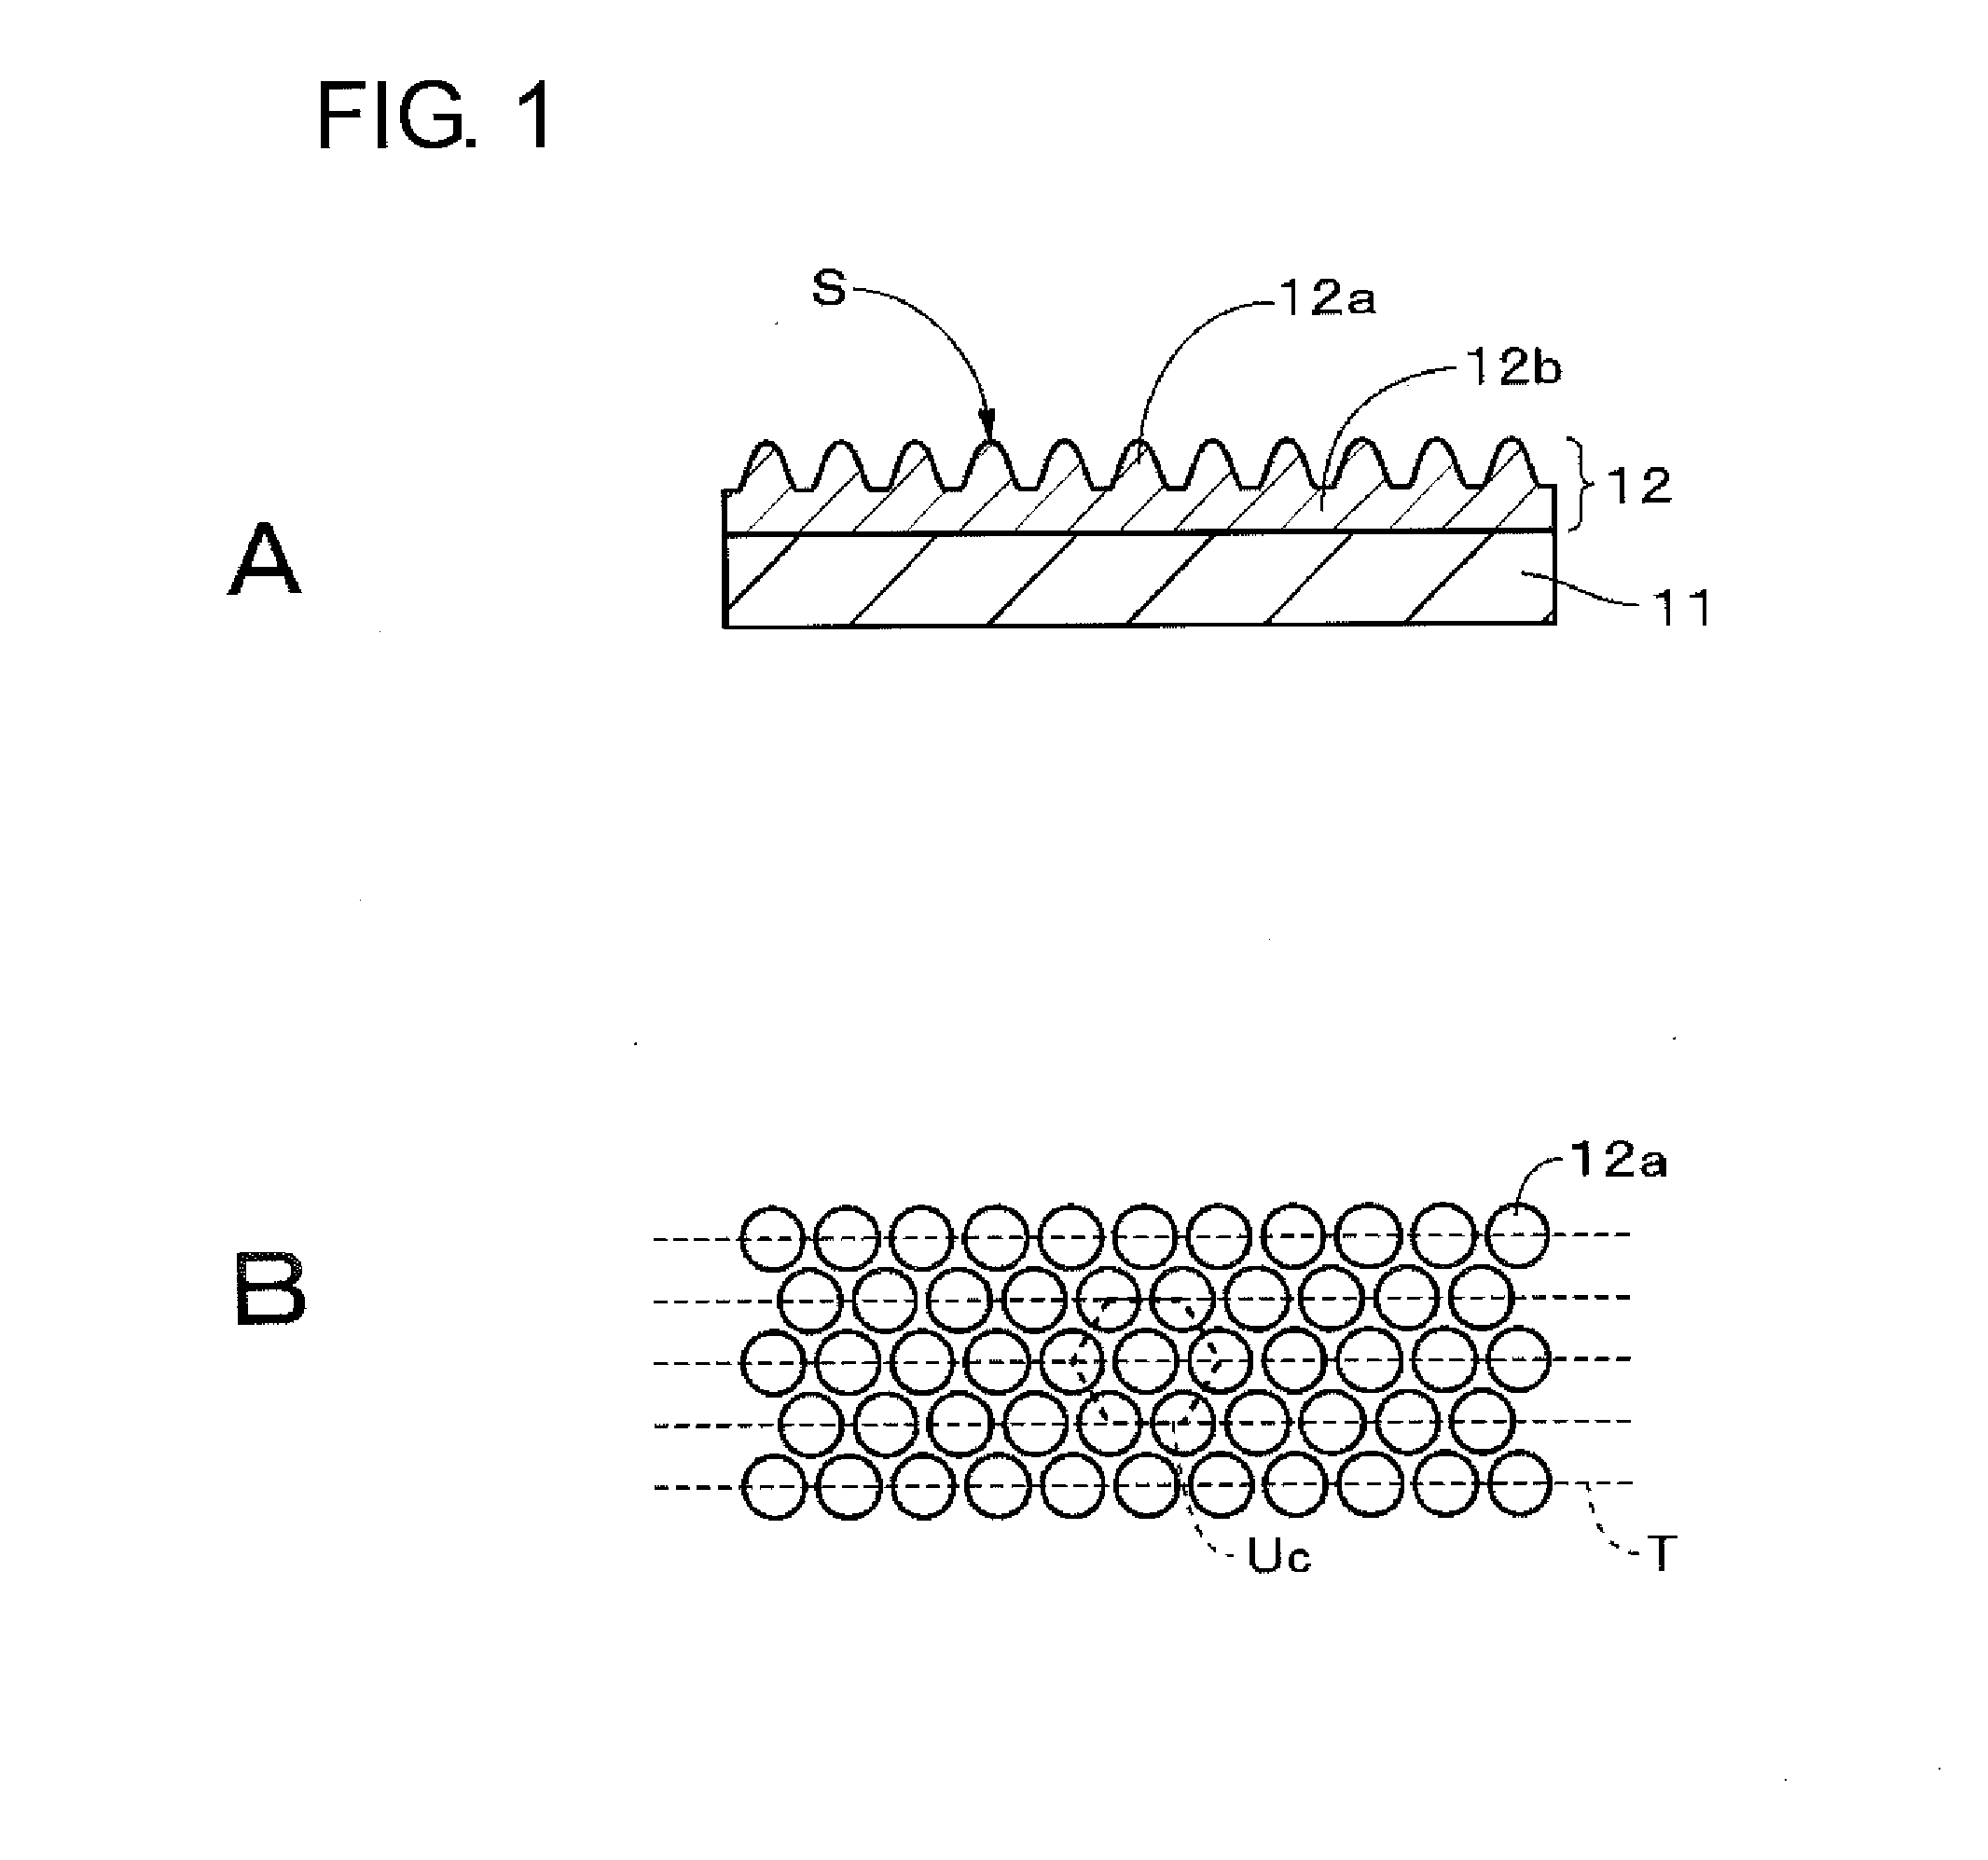 Anti-smudge body, display device, input device, electronic device, and Anti-smudge article